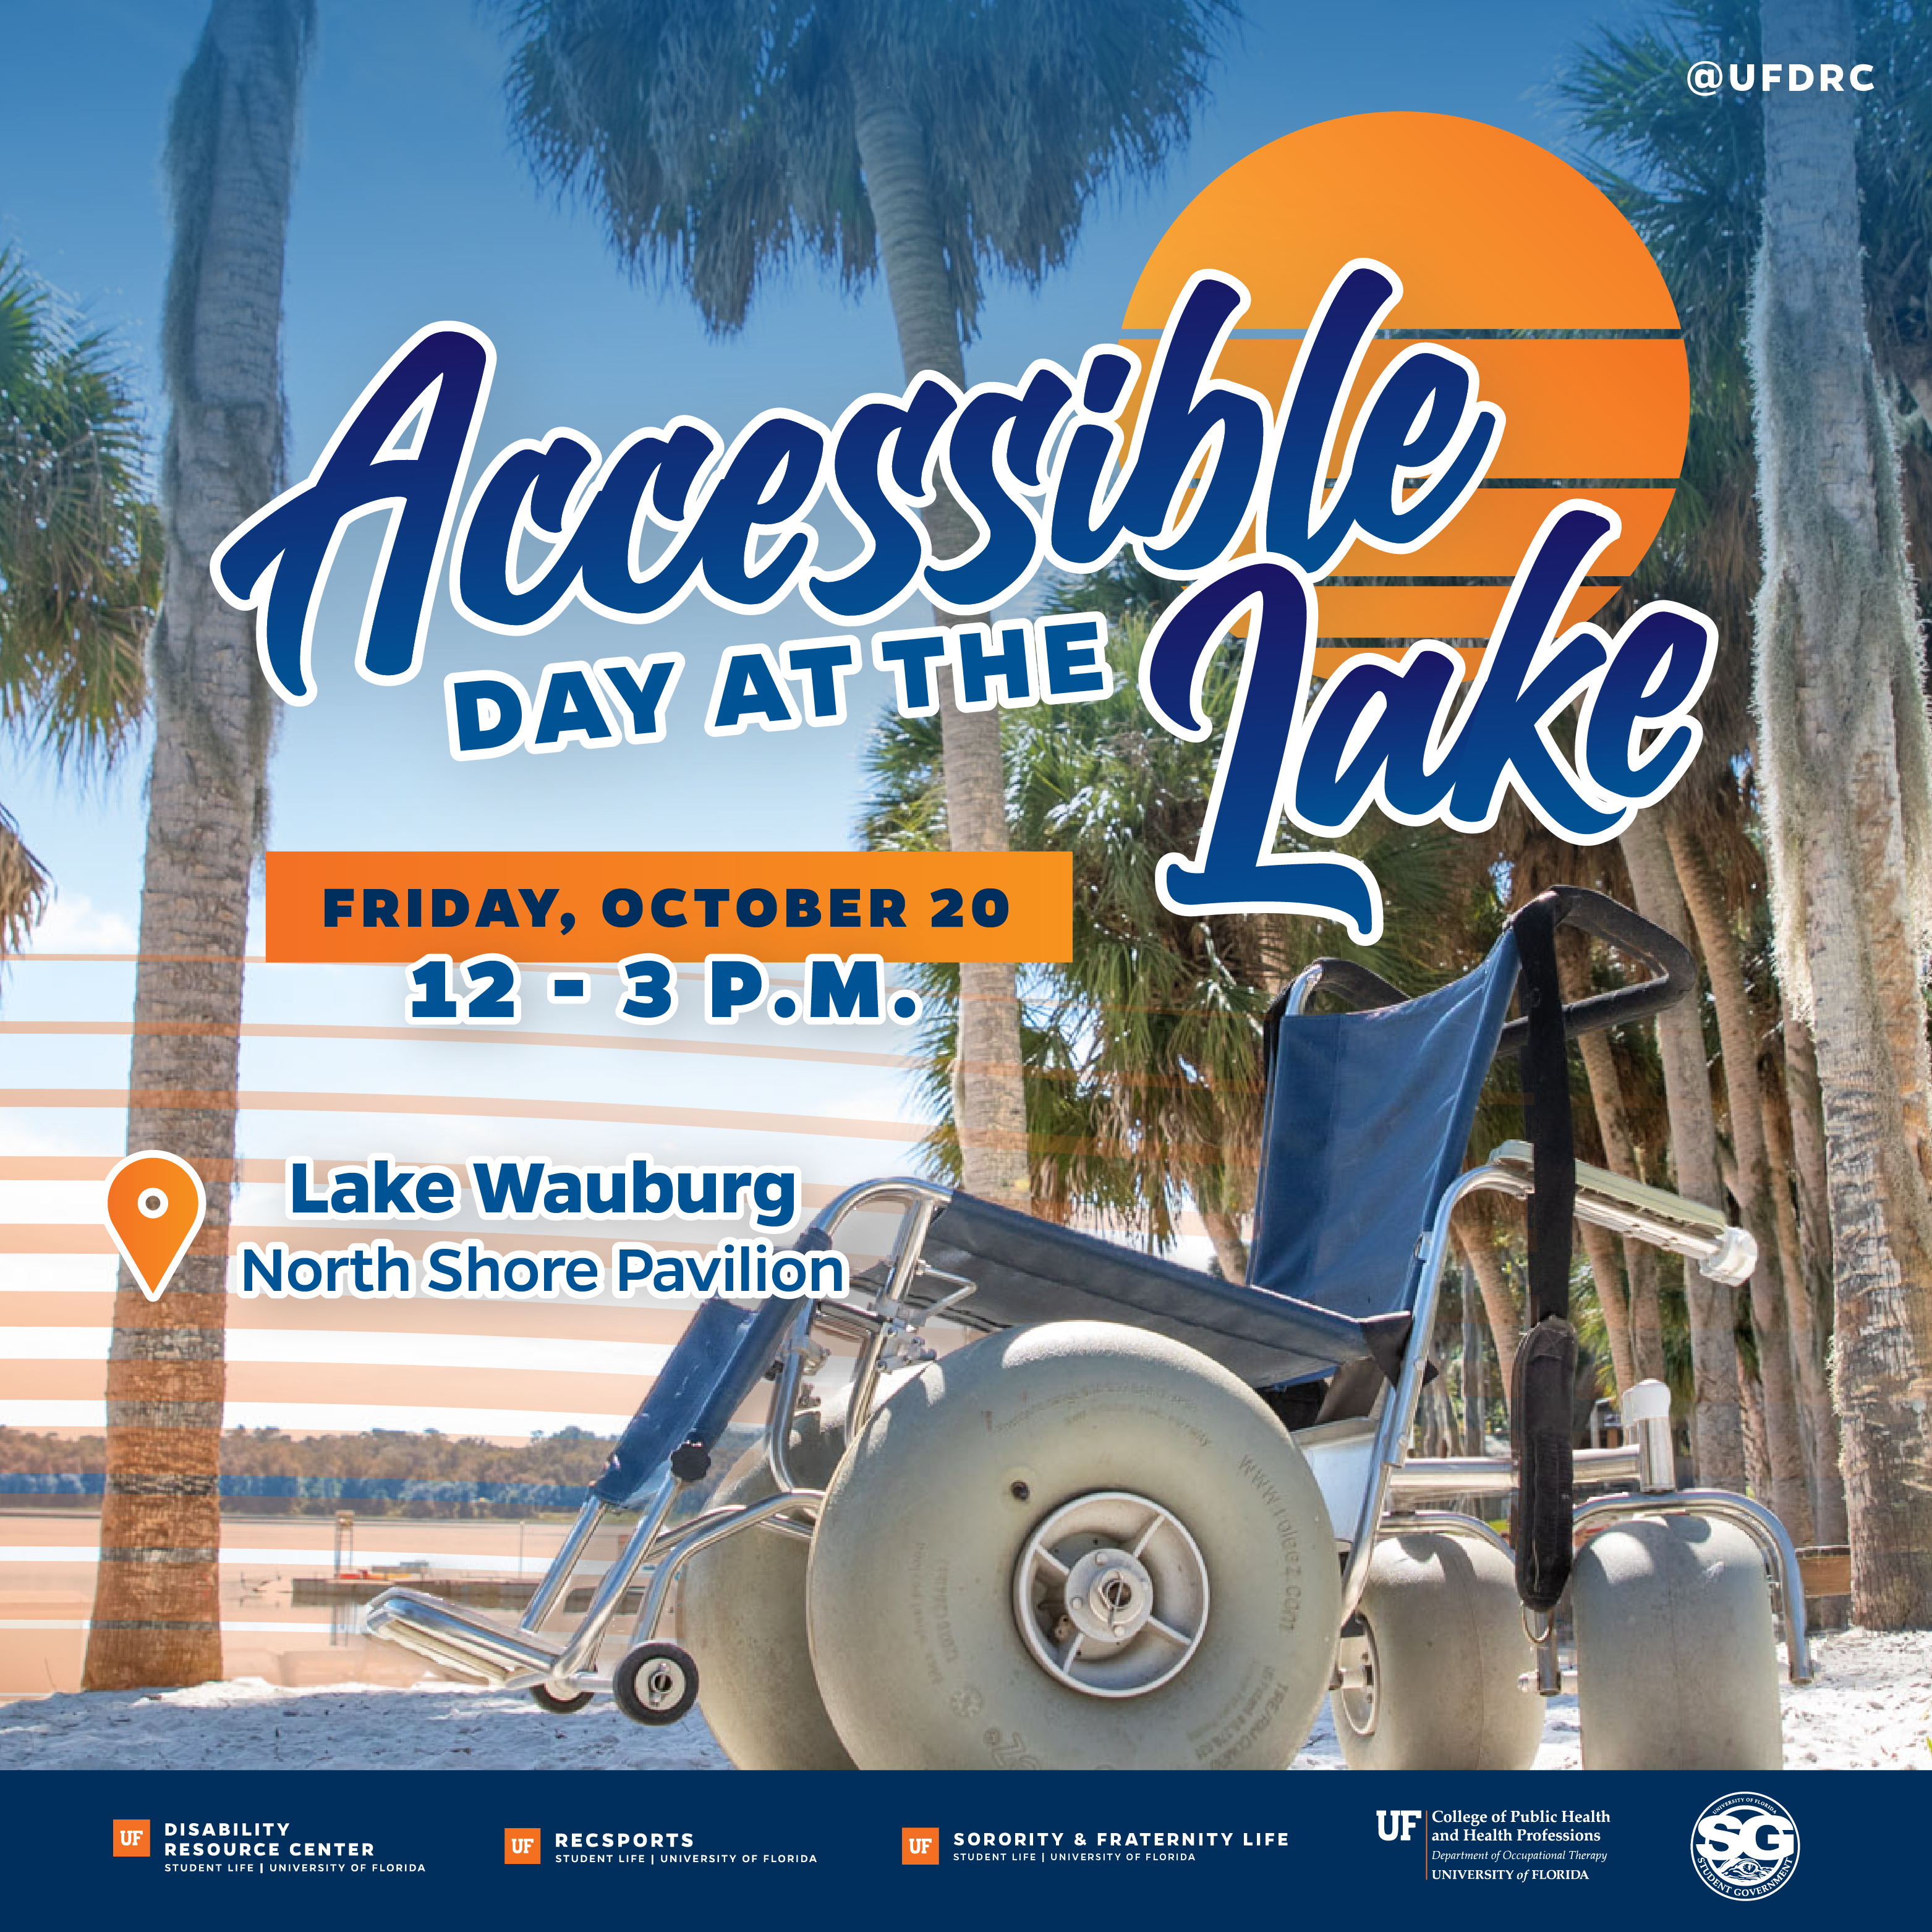 Accessible Day at the Lake is happening October 20 from 12 - 3 p.m.